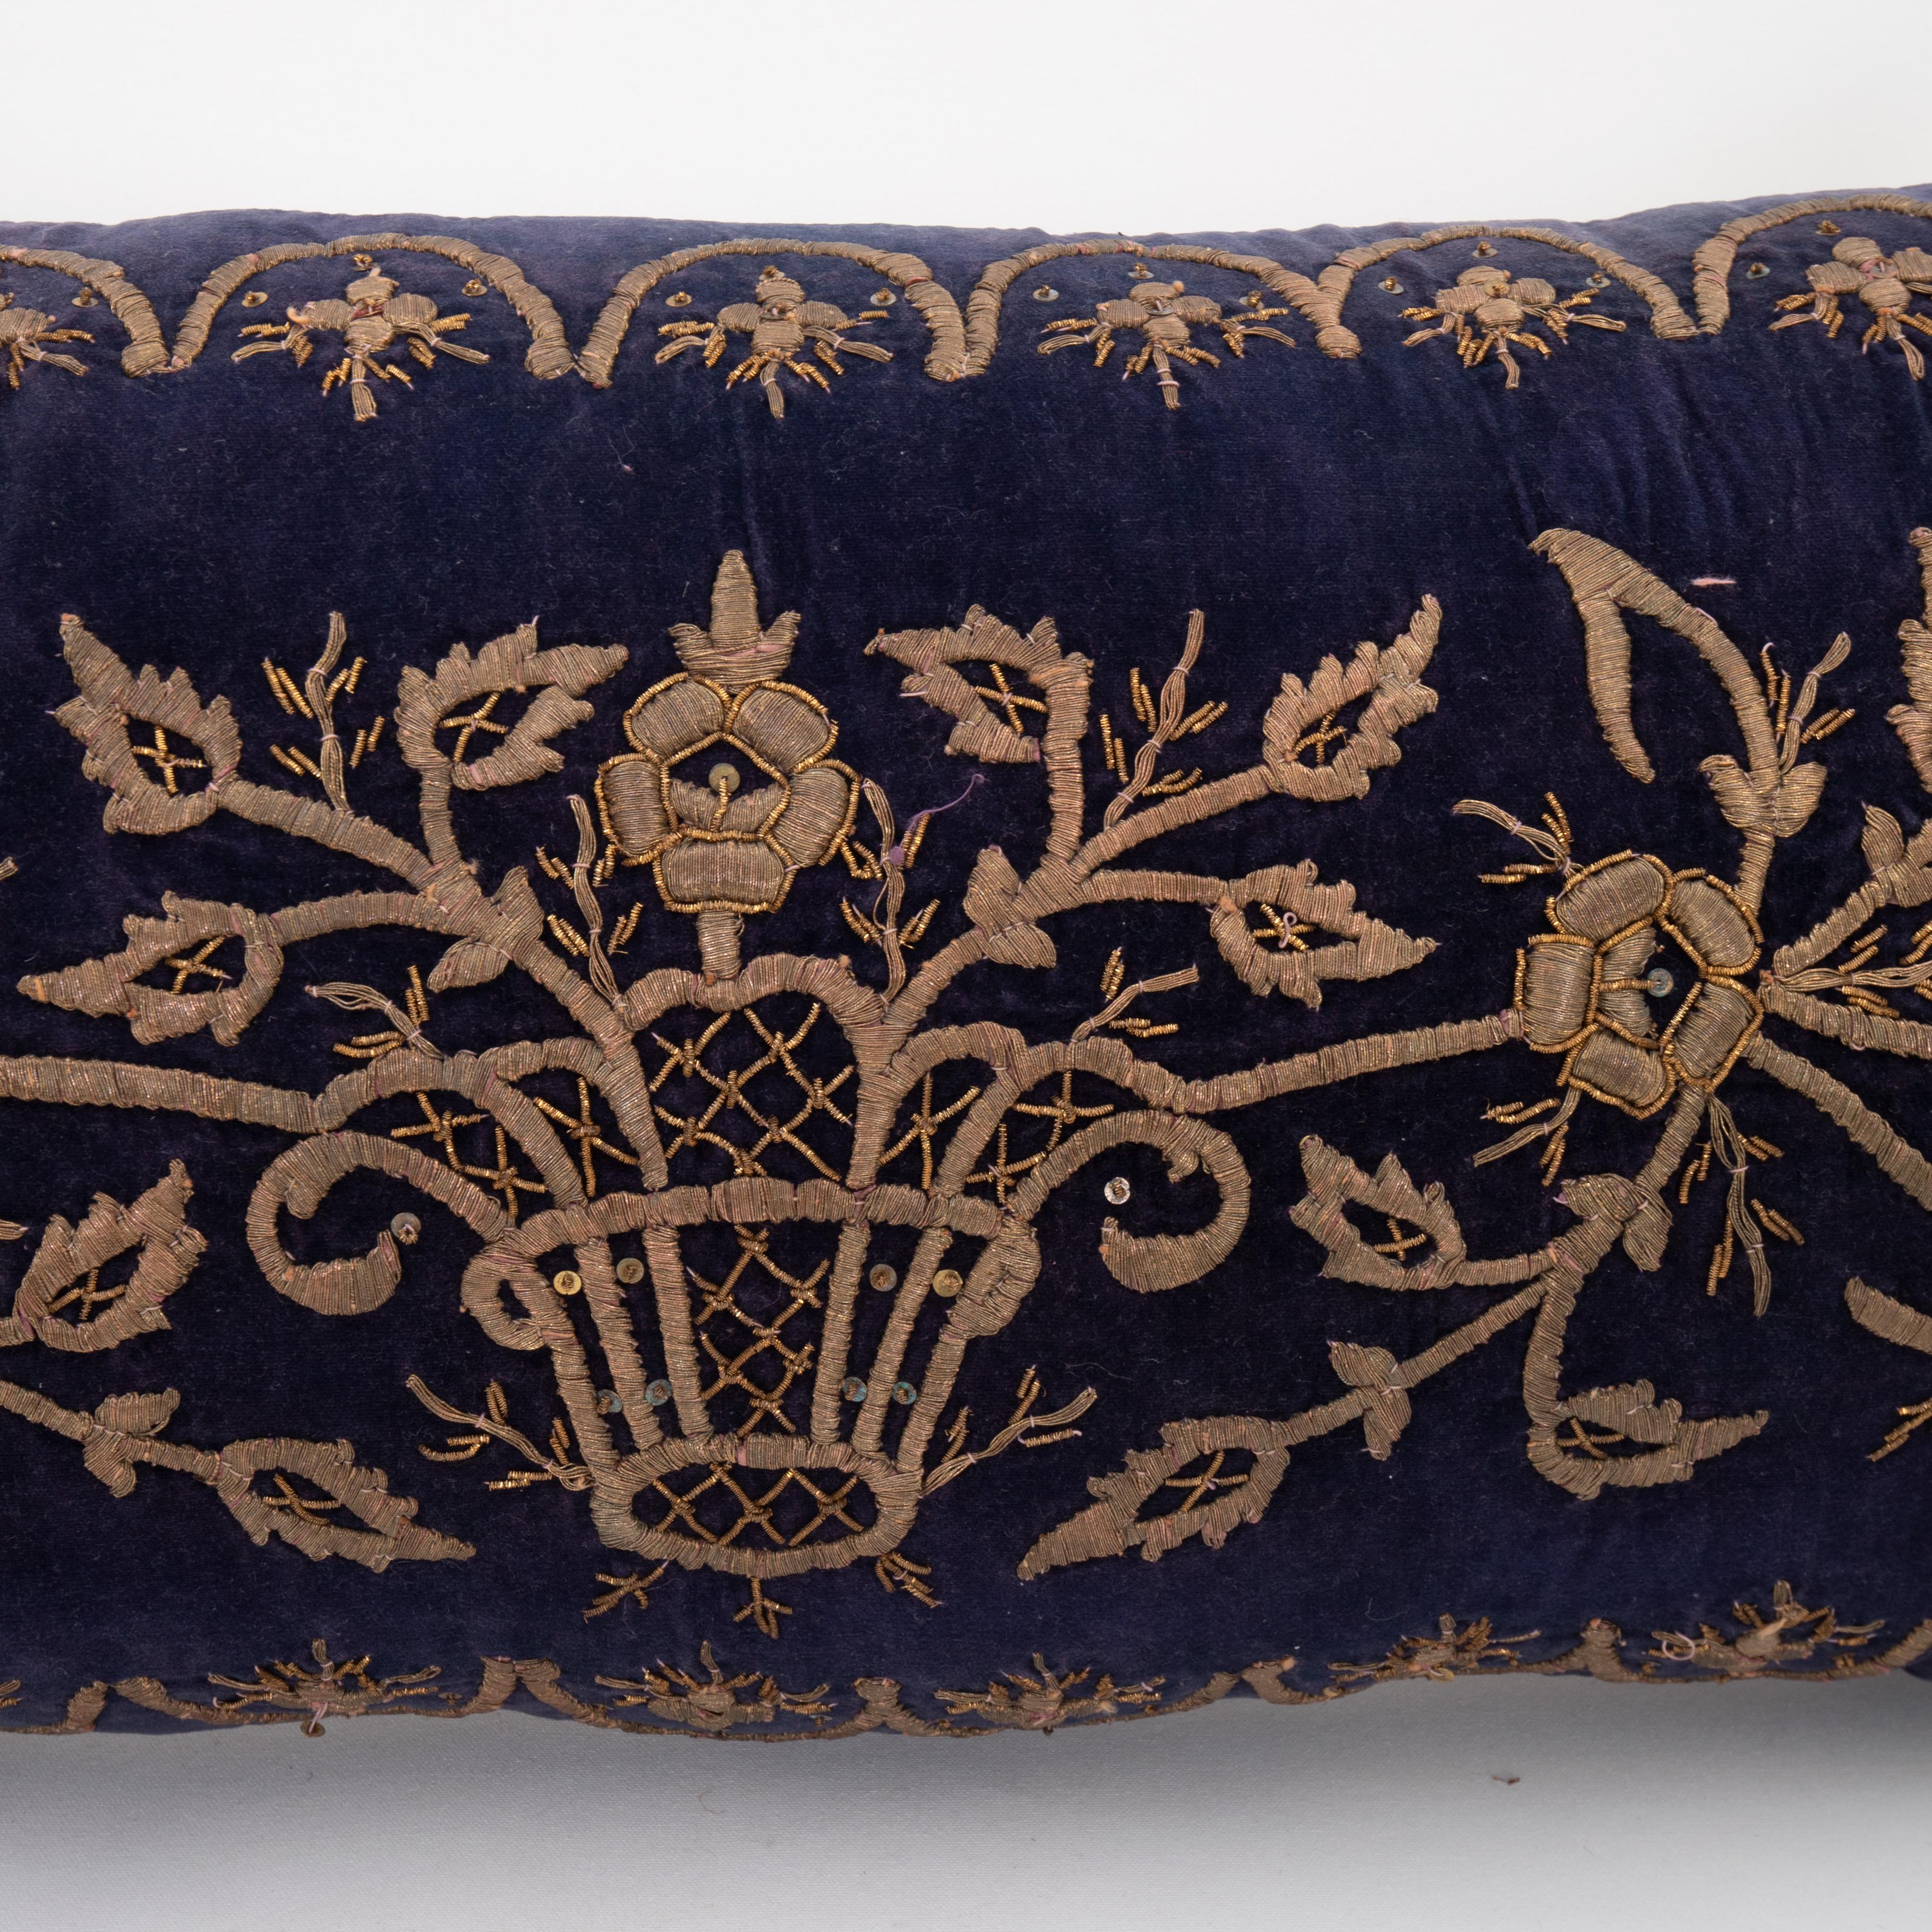 Embroidered Ottoman Pillow Cover in Sarma Technique, late 19th / Early 20th C. For Sale